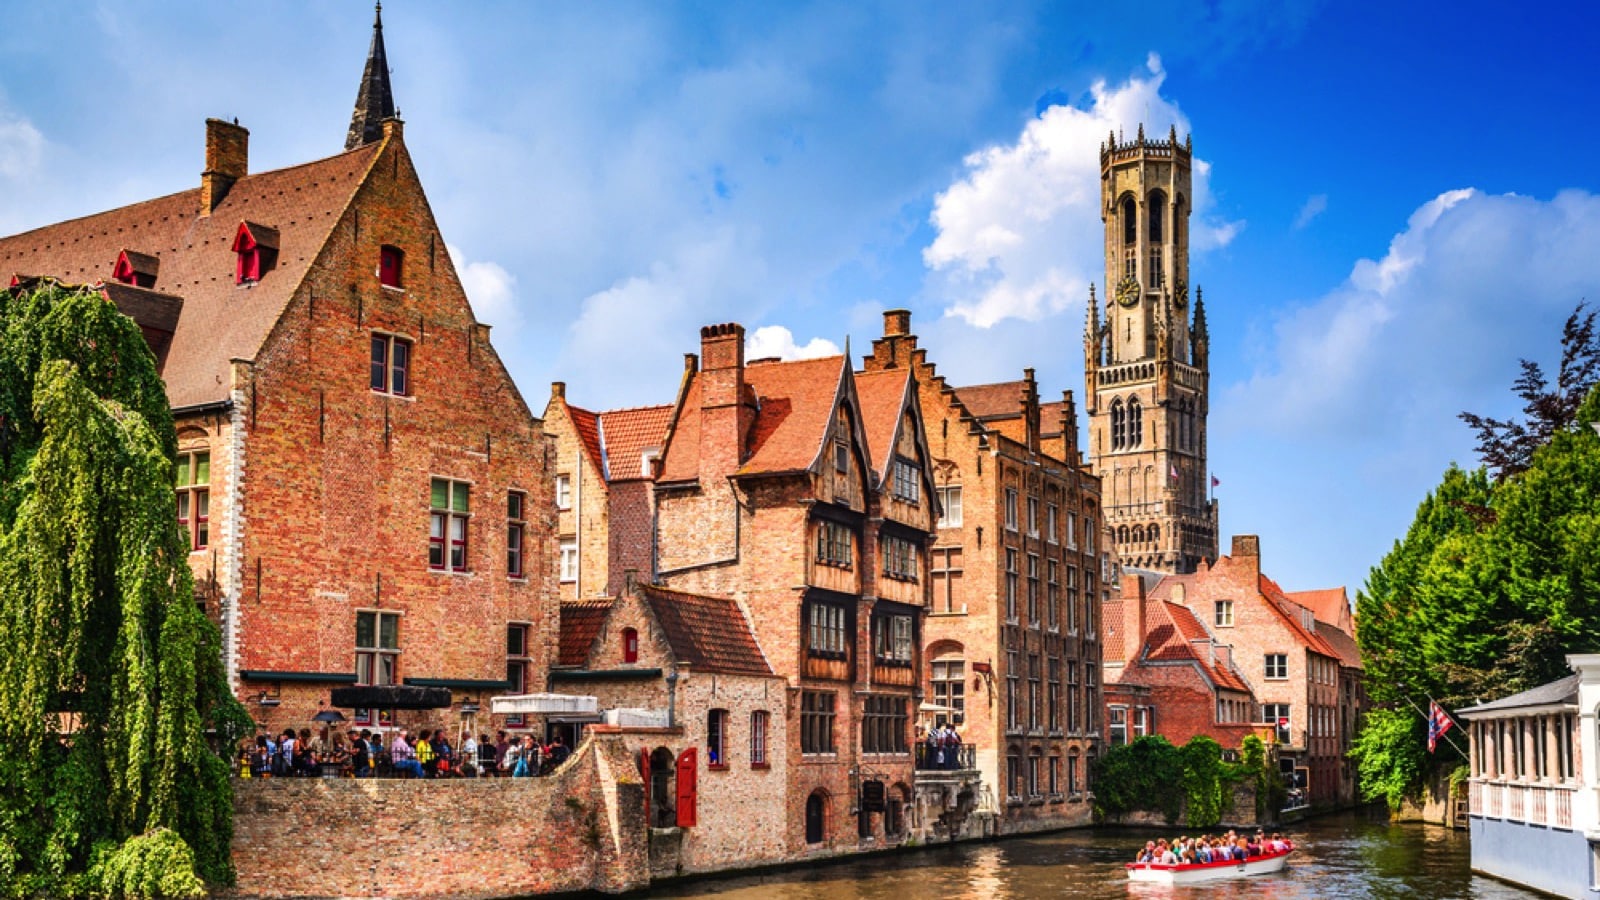 <p>Belgium is known as a very safe country to visit and it's a popular destination for not only solo travelers (and female solo travelers in particular), but young study-abroad students too. Another bonus is that most of the cities are well-lit and pretty easy to navigate.</p>